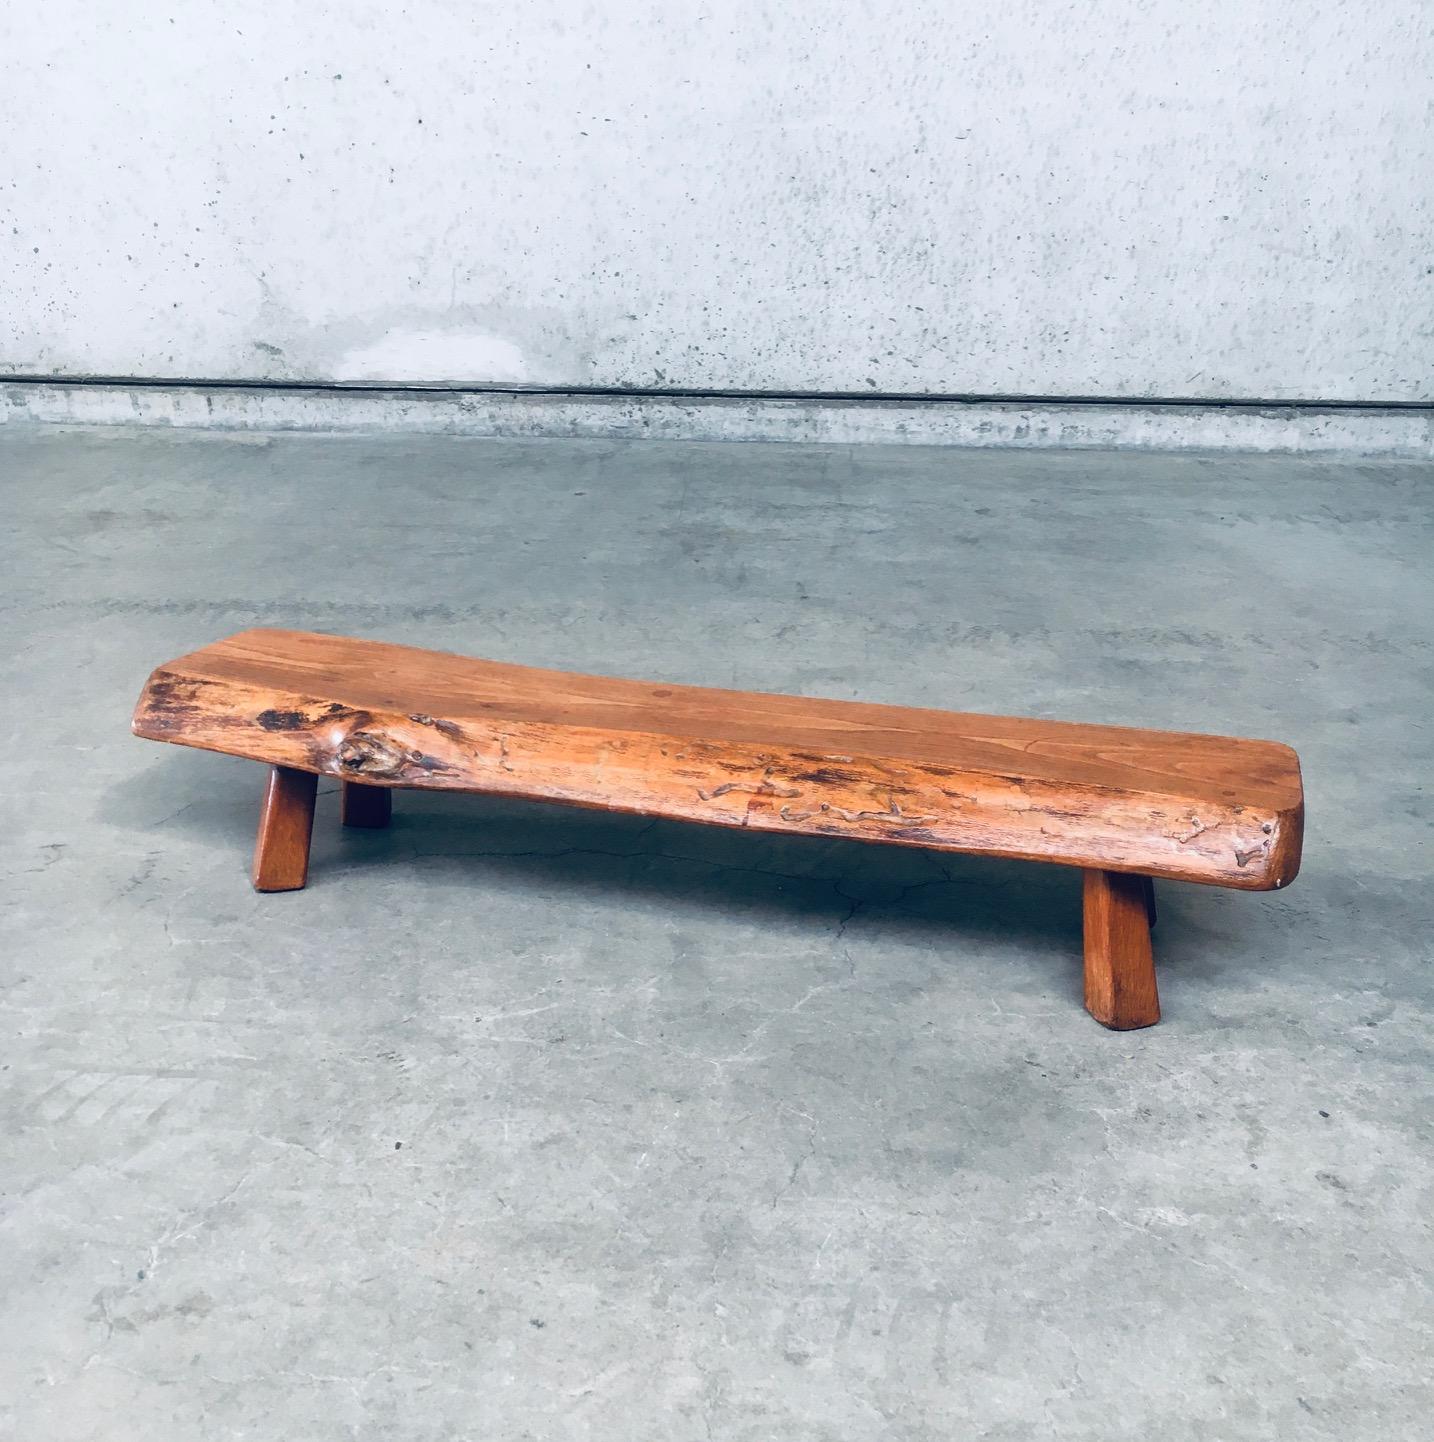 Wabi Sabi Brutalist Design Handcrafted Low Display Table. Made in Belgium by Atelier Andre Smalle, 1960's period. Stamped on the bottom. Solid oak slab on 4 square cone carved shaped feet. This can be used as a low plant or display side table. Comes